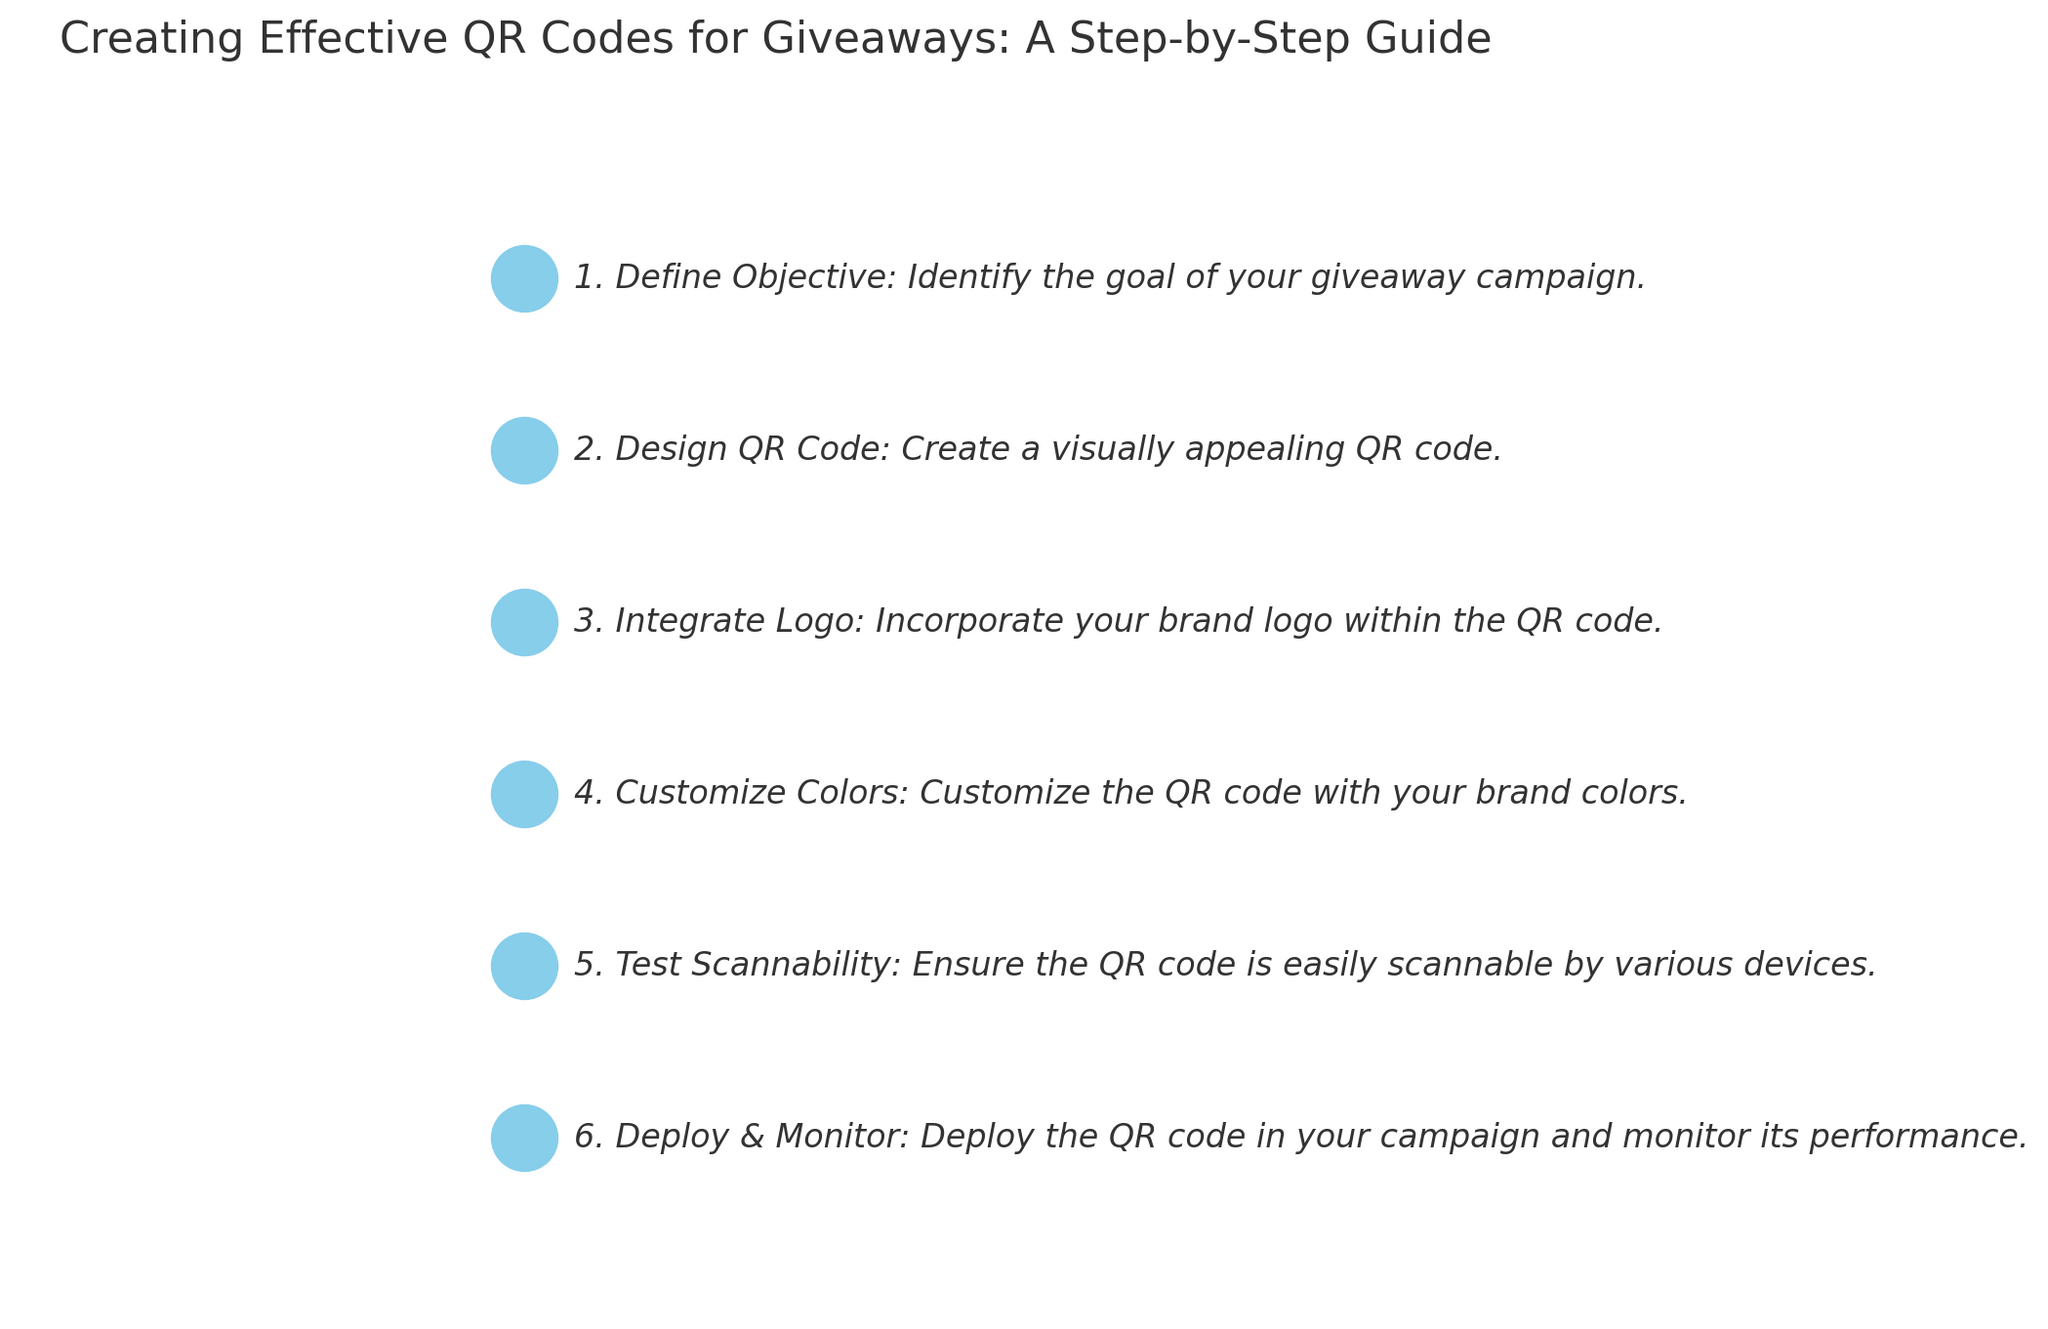 Creating Effective QR Codes for Giveaways